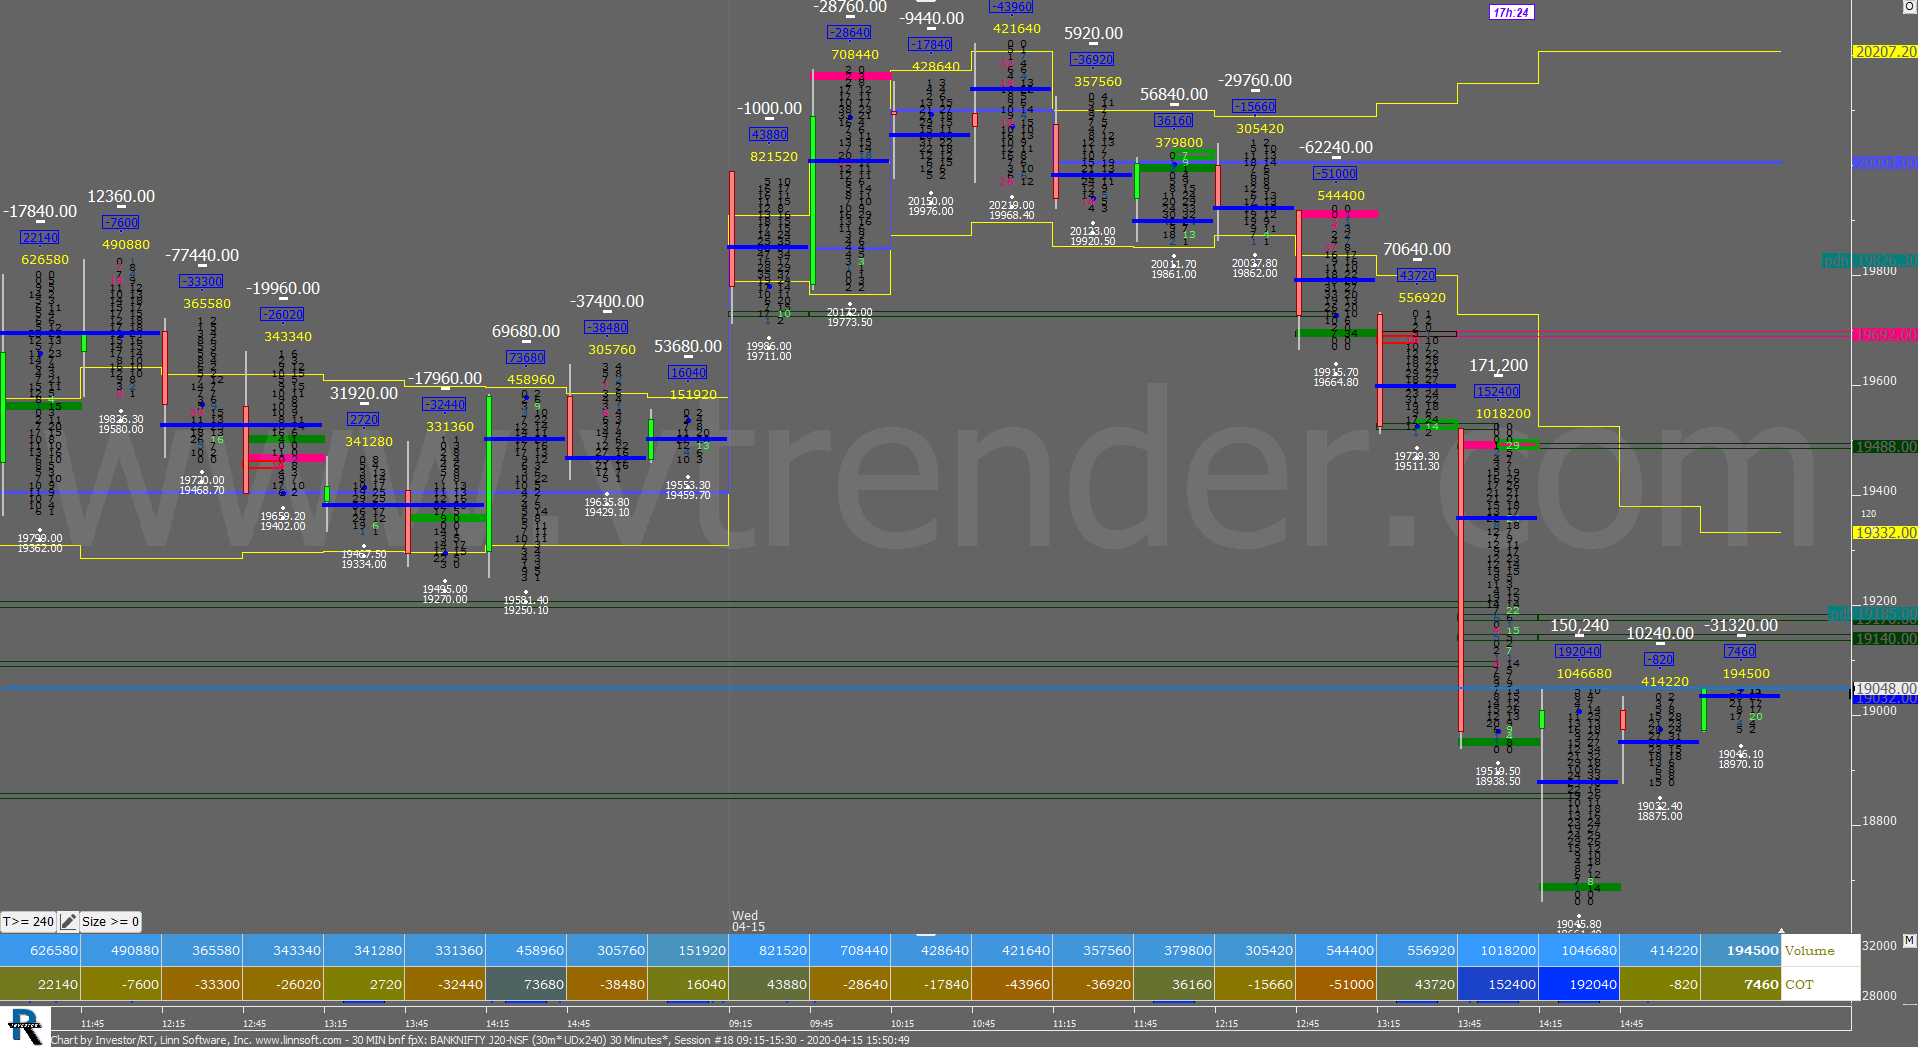 30 Min Bnf Fpx 6 Order Flow Charts Dated 15Th Apr 2020 Banknifty Futures, Day Trading, Intraday Trading, Intraday Trading Strategies, Nifty Futures, Order Flow Analysis, Support And Resistance, Trading Strategies, Volume Profile Trading